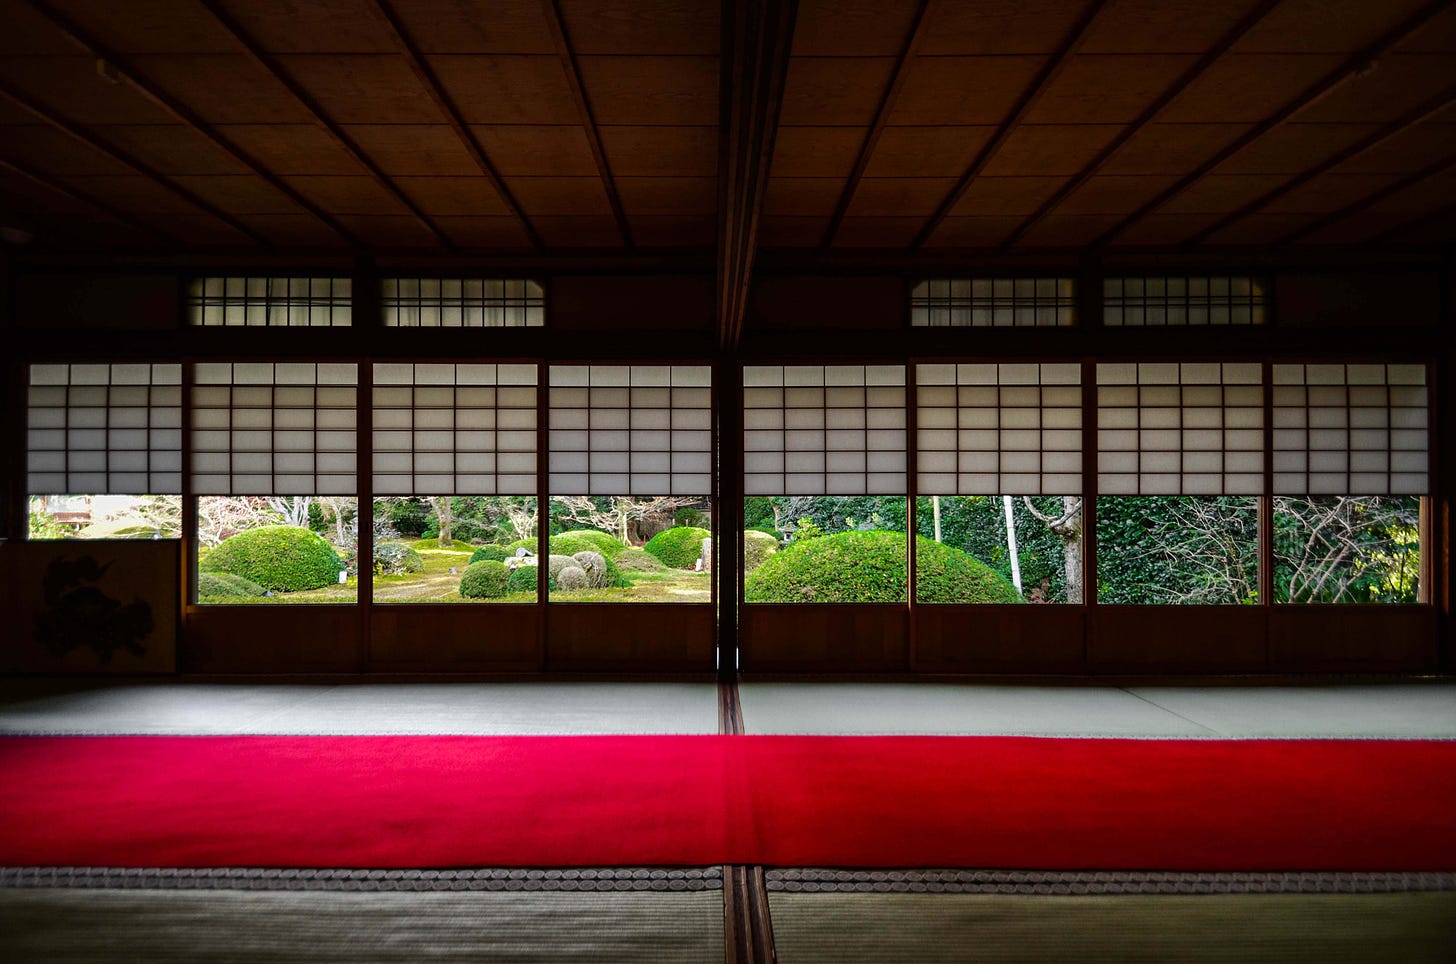 Unryuin Temple in Kyoto has rooms devoted to Kazarimadō , the ornamental windows, and nature sceneries.